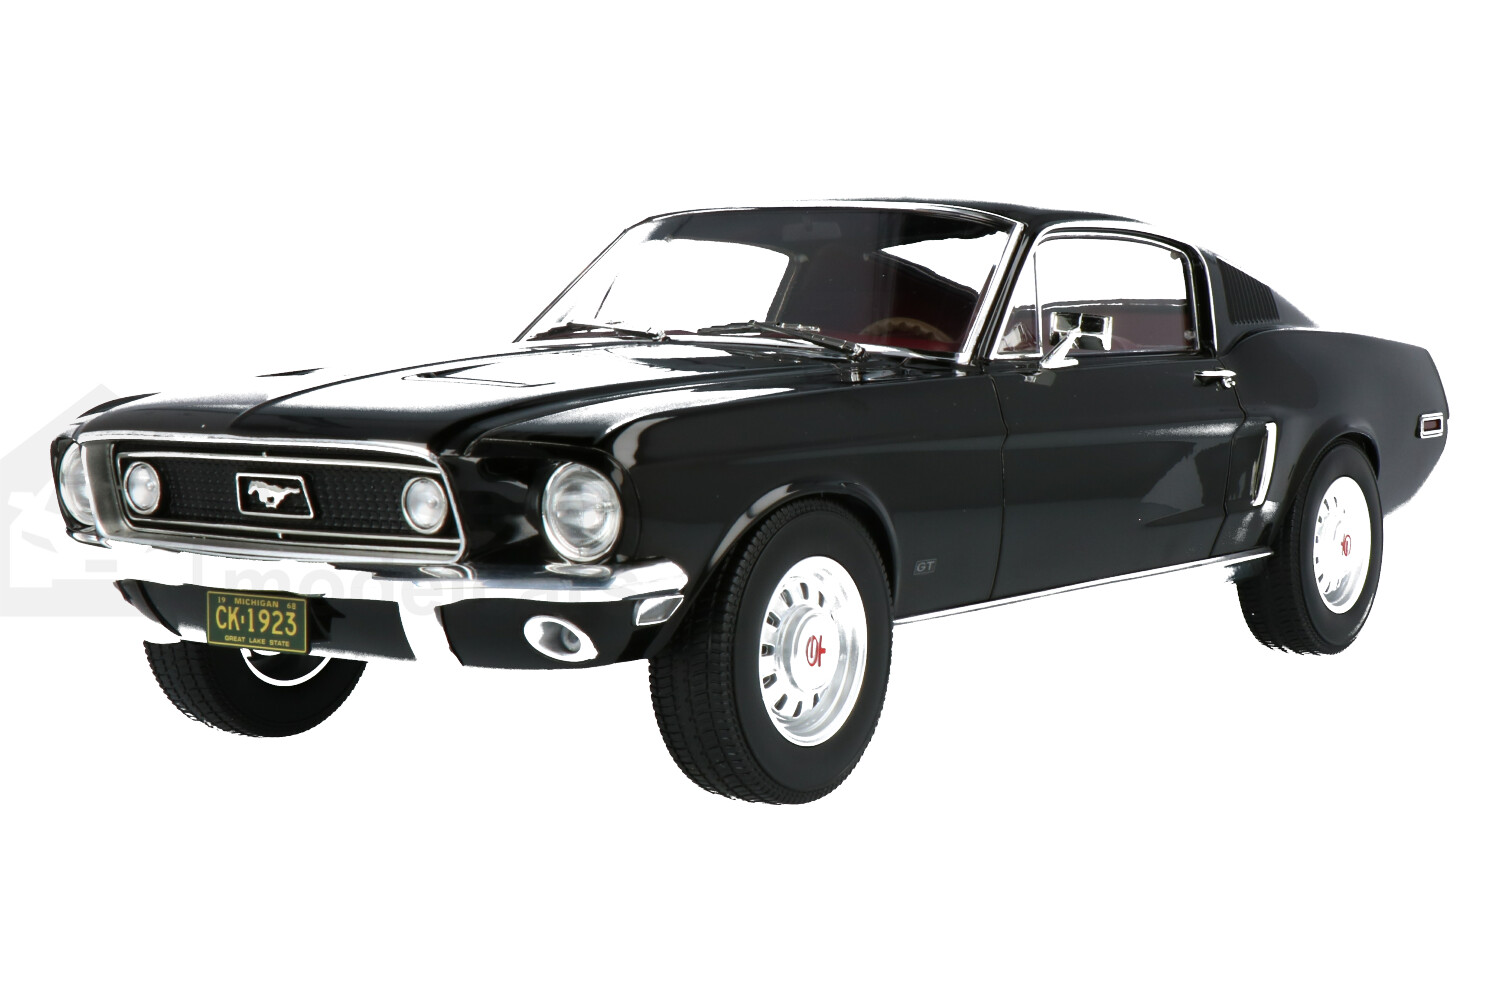 Ford-Mustang-Fastback-122700_13153551091227007-NorevFord-Mustang-Fastback-122700_Houseofmodelcars_.jpg